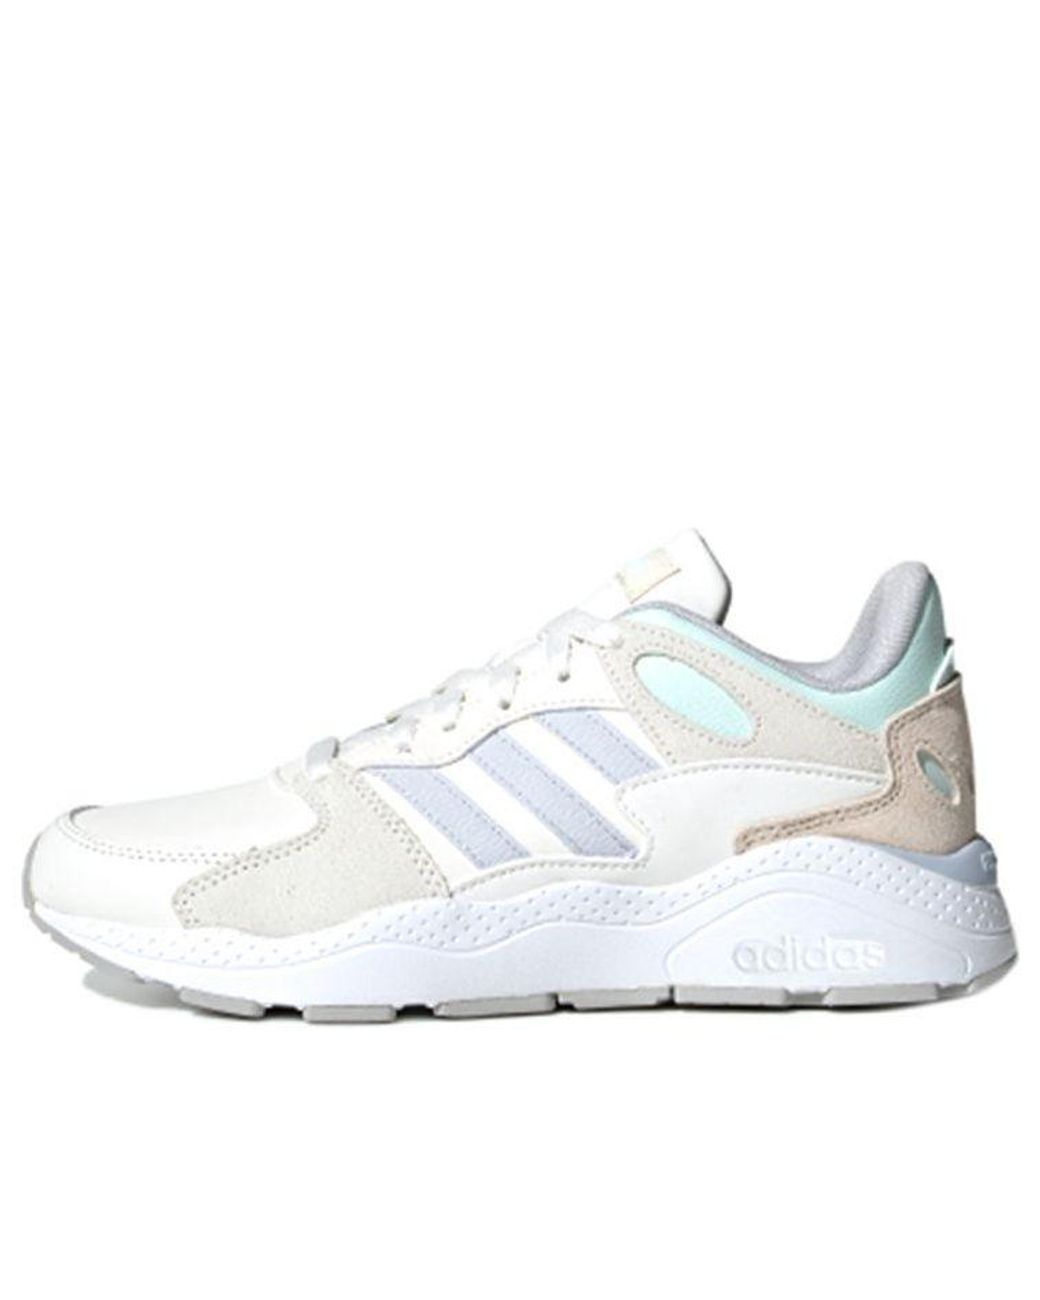 Adidas Neo Adidas Chaos 'ice Mint' in White | Lyst